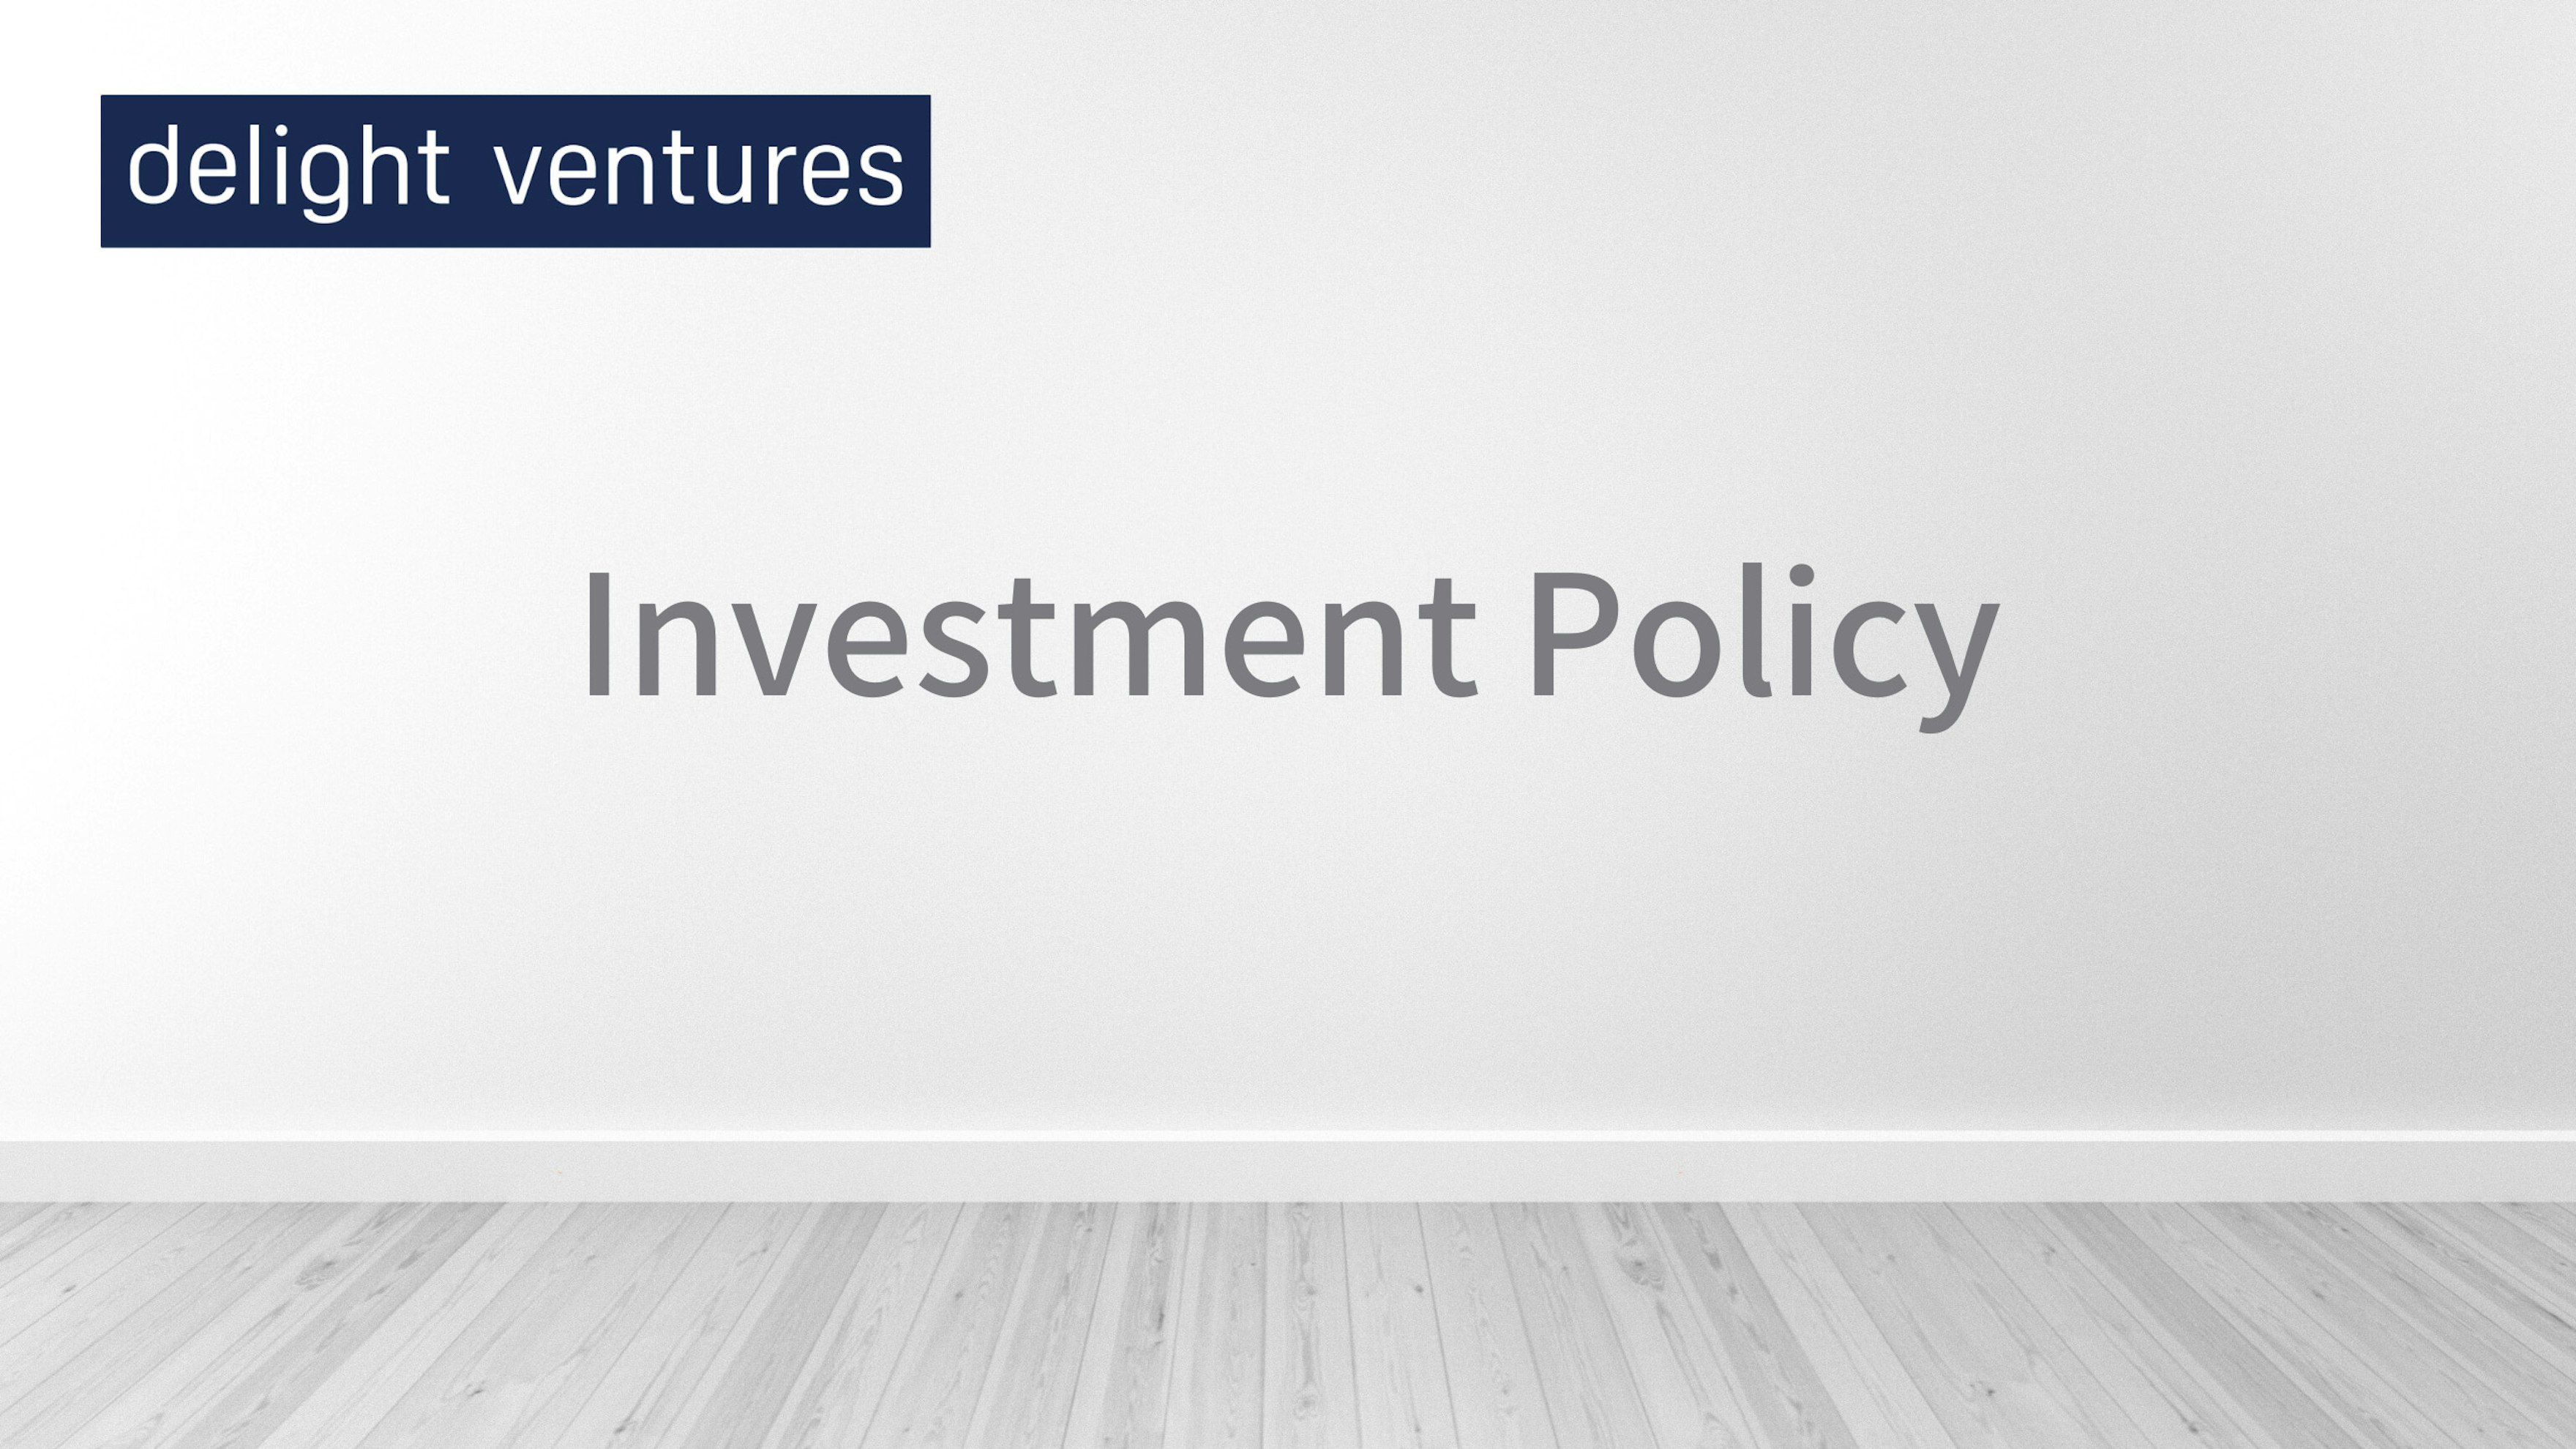 Delight Ventures Investment Policy